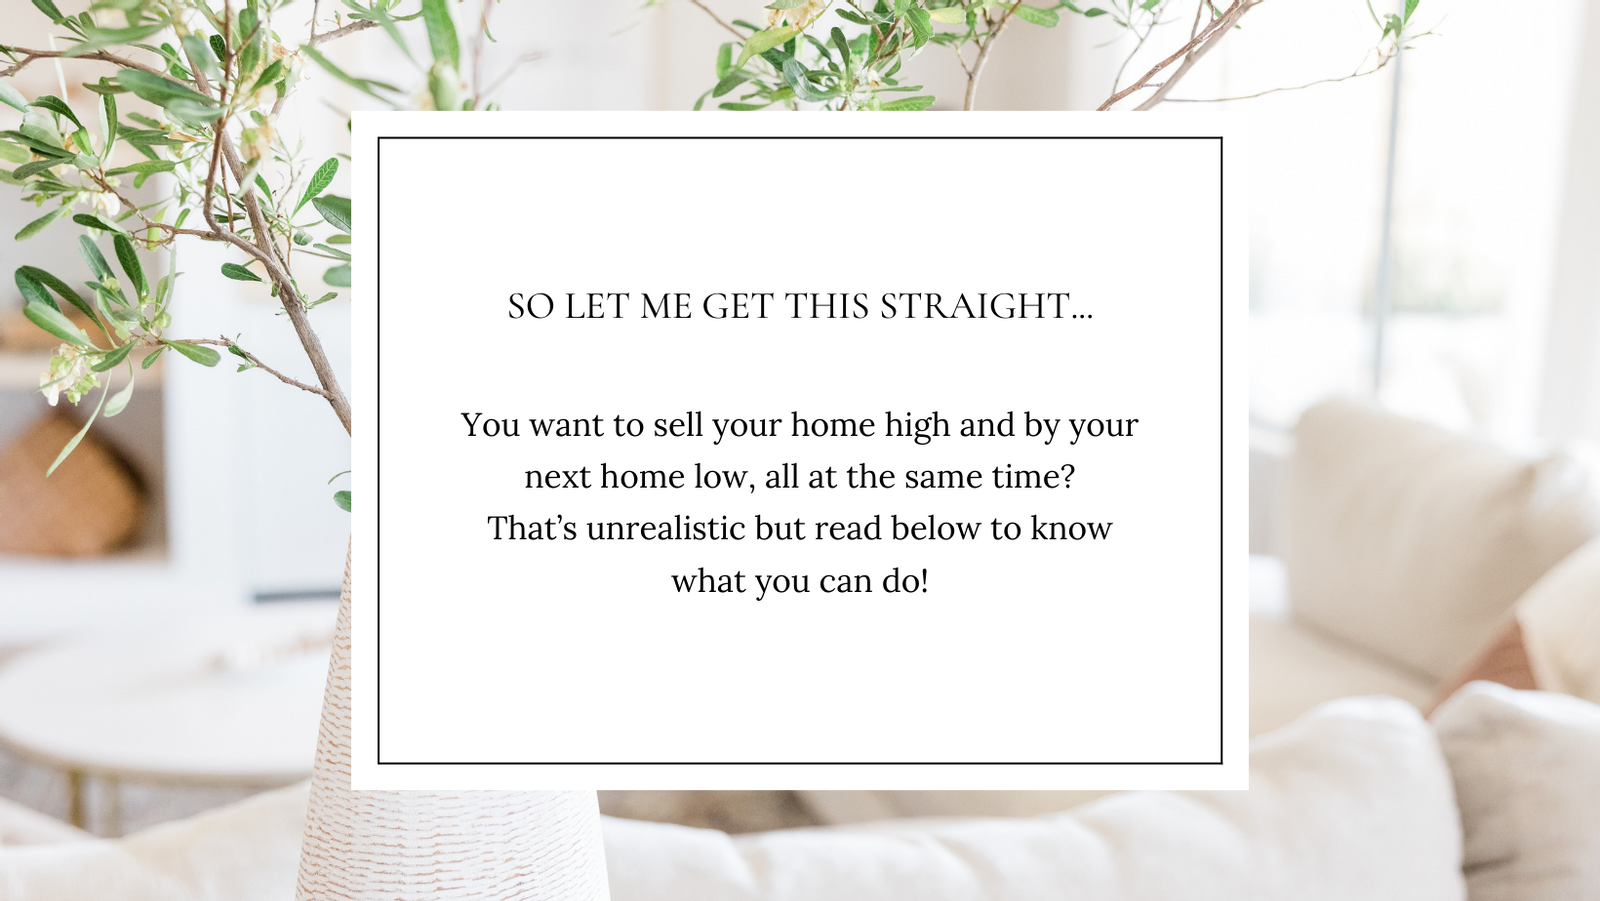 Sell your home high and Buy your next home low??? 